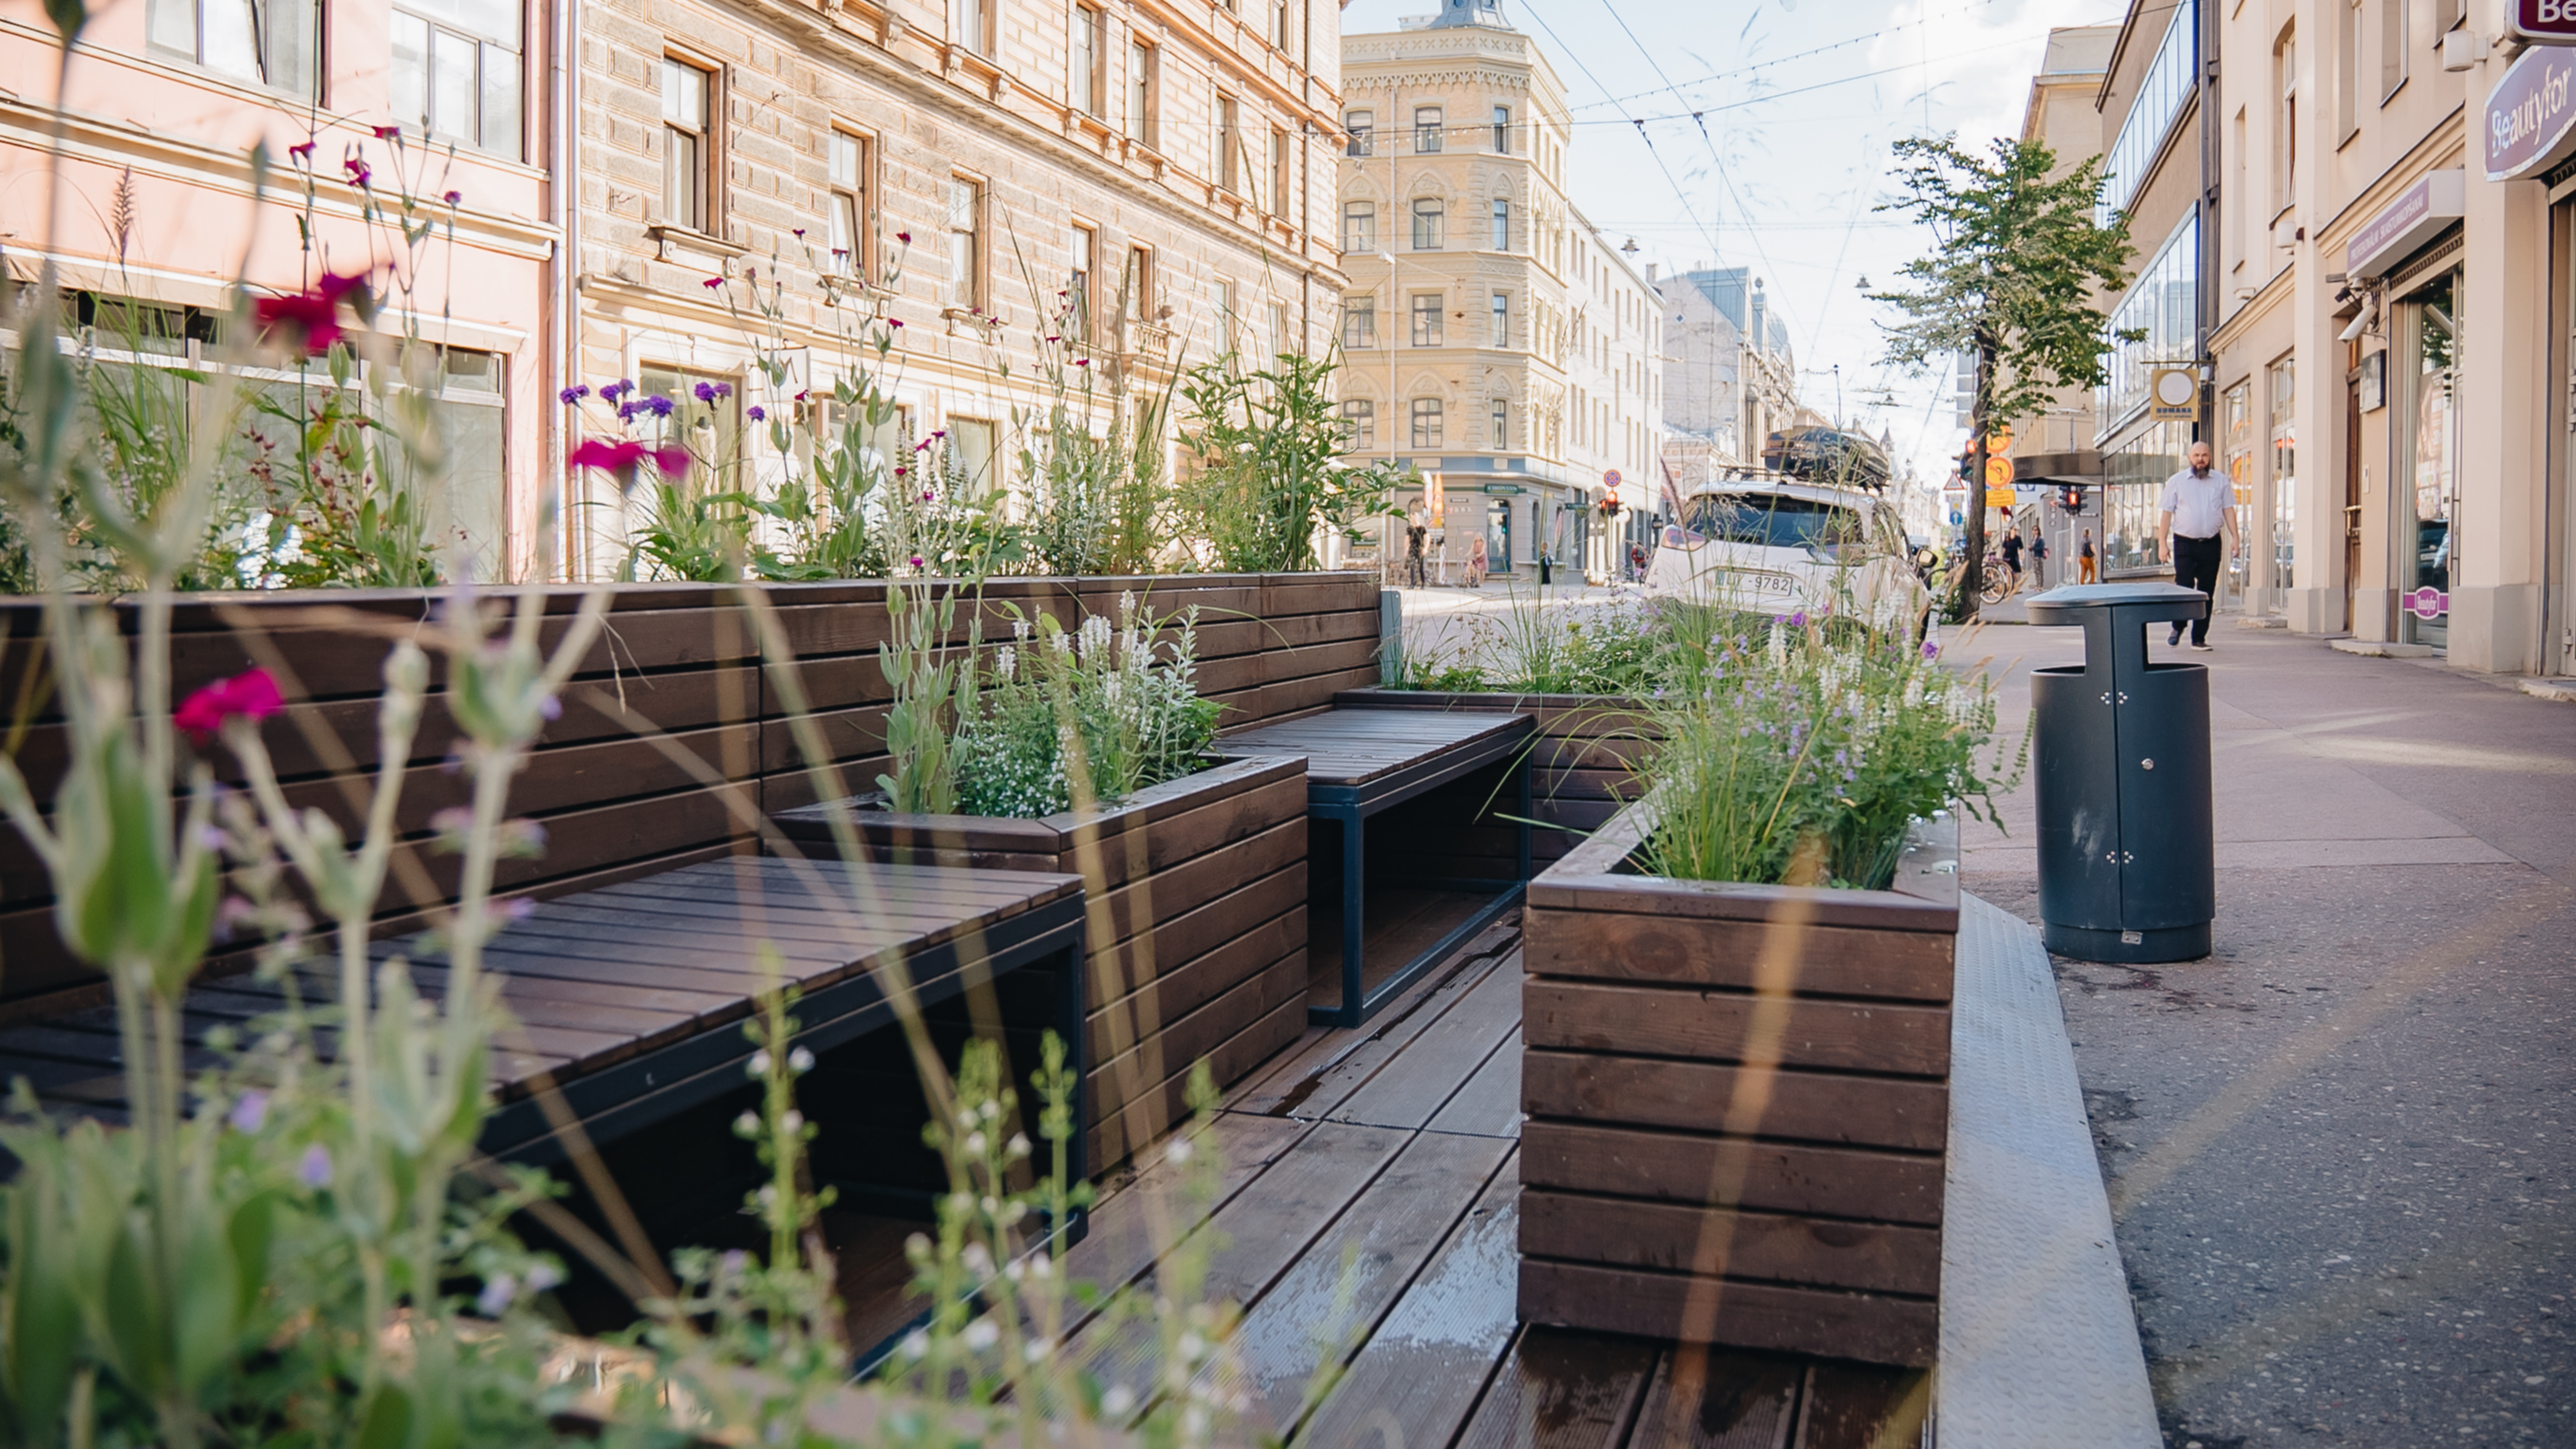 A wooden construction to replace a parking space with greenery and resting places in Riga.